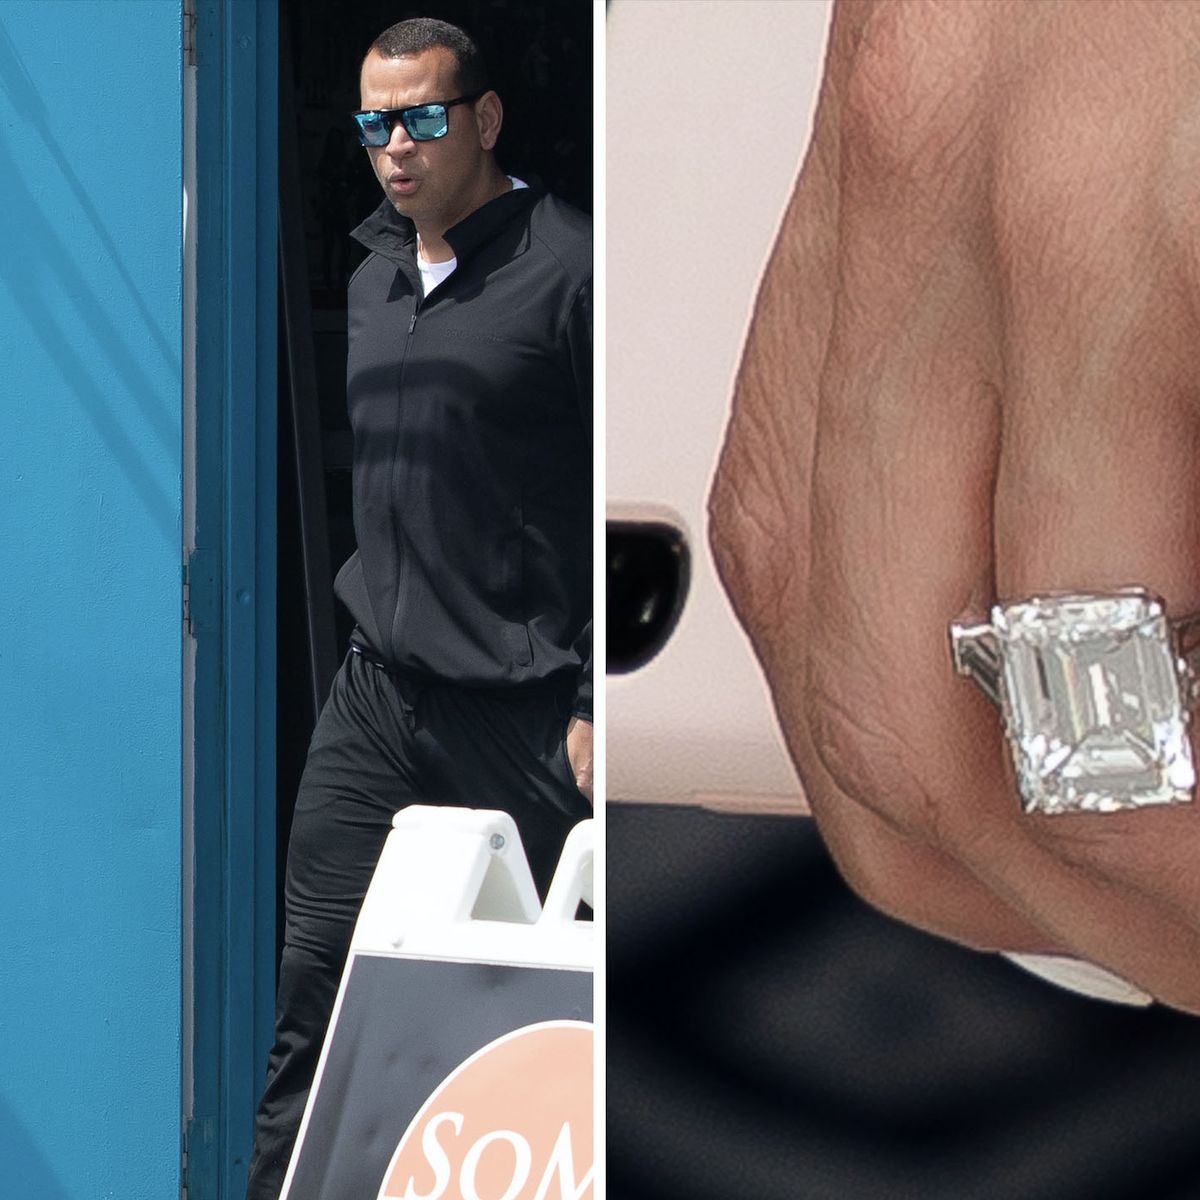 12 of the Most Expensive Engagement Rings Ever Seen